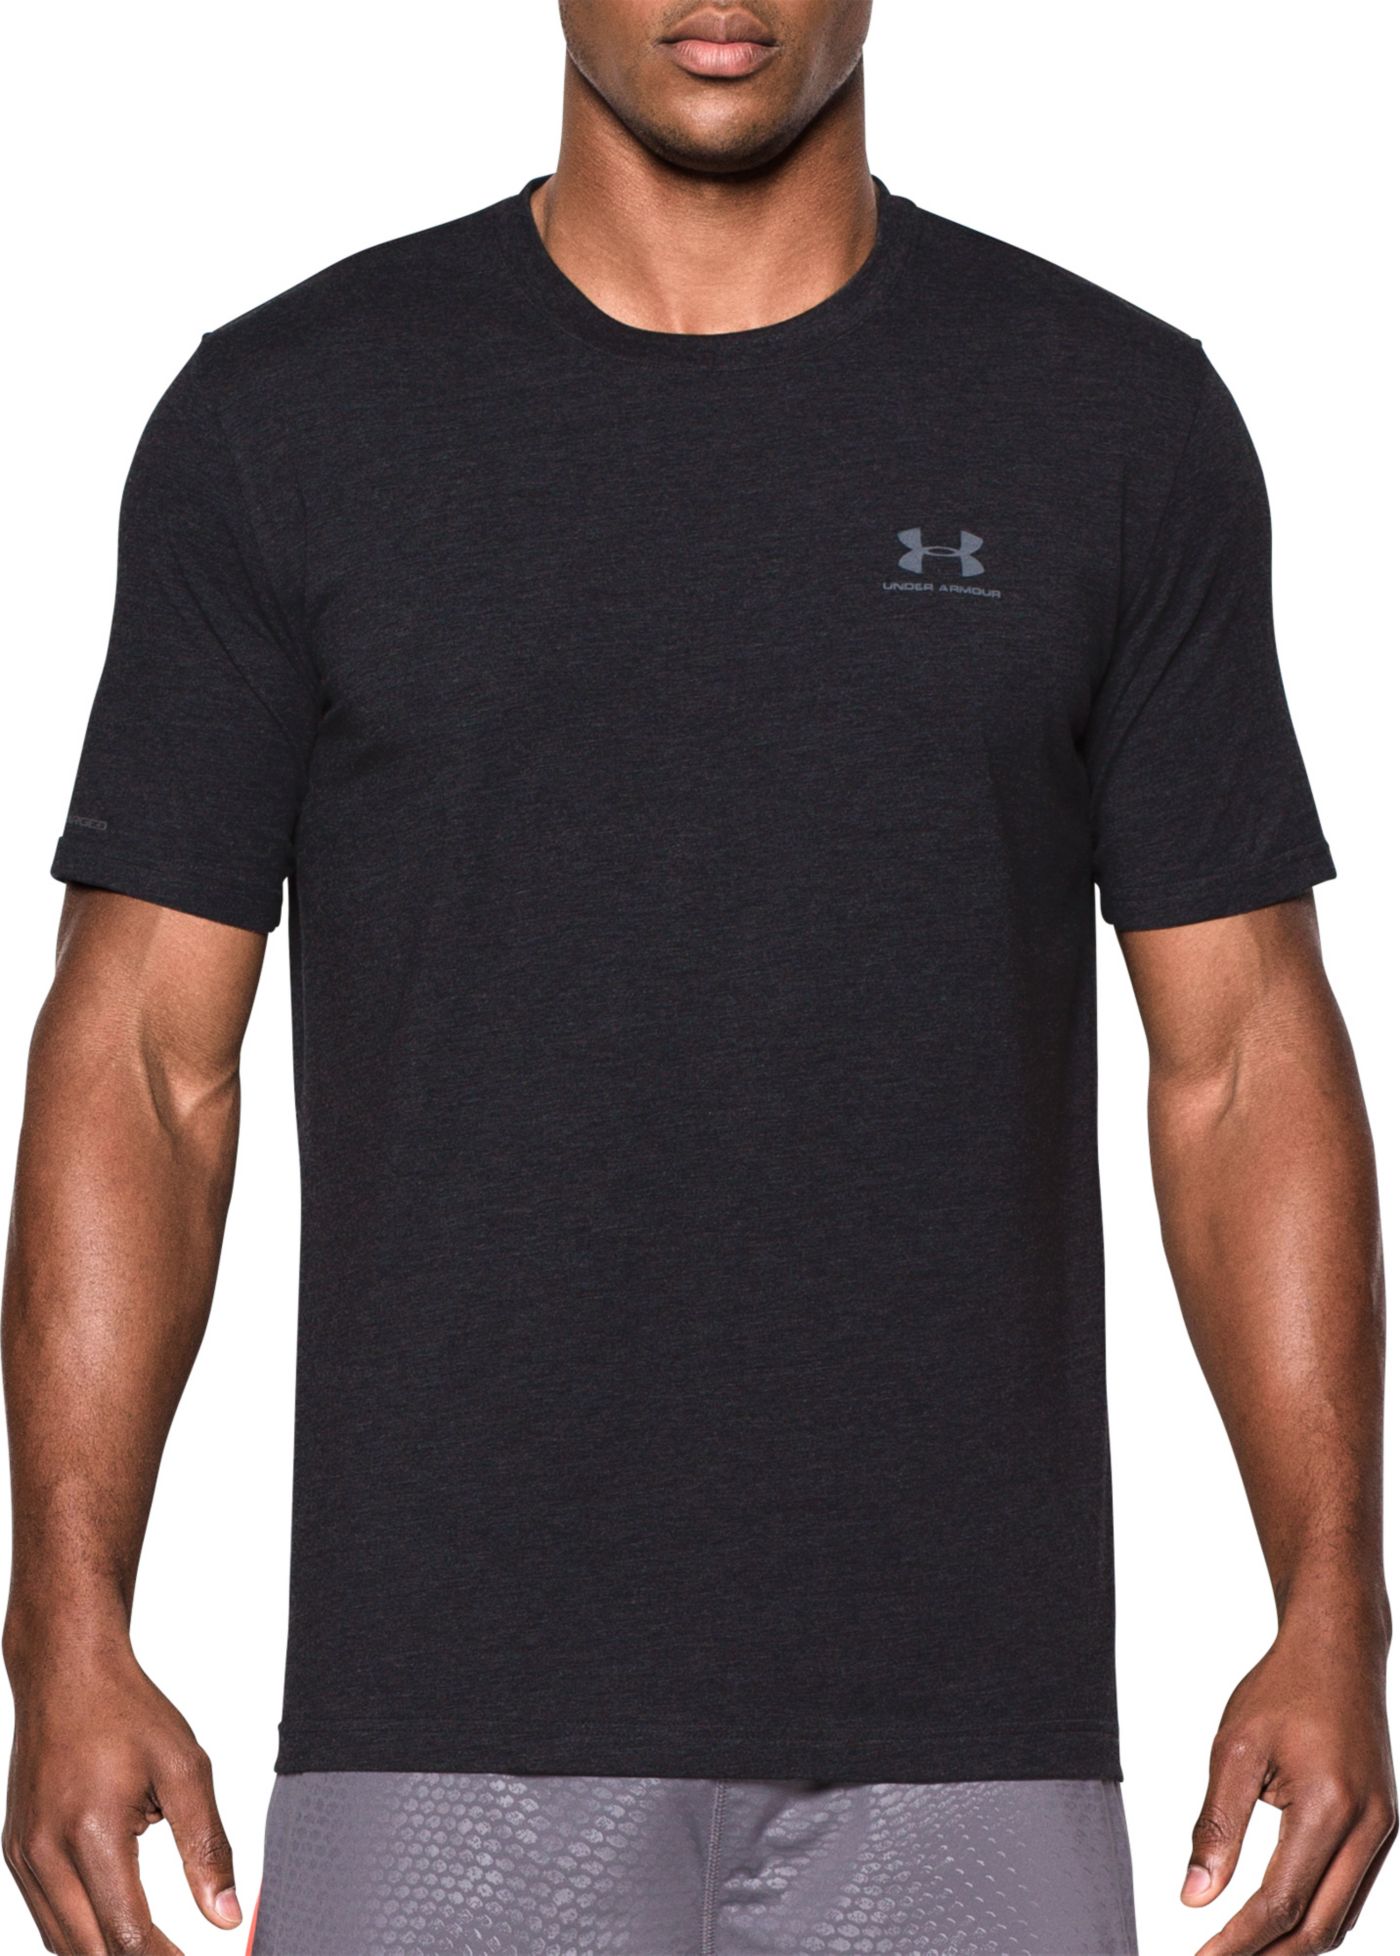 Under Armour Men's Charged Cotton Sportstyle T-Shirt | DICK'S Sporting ...